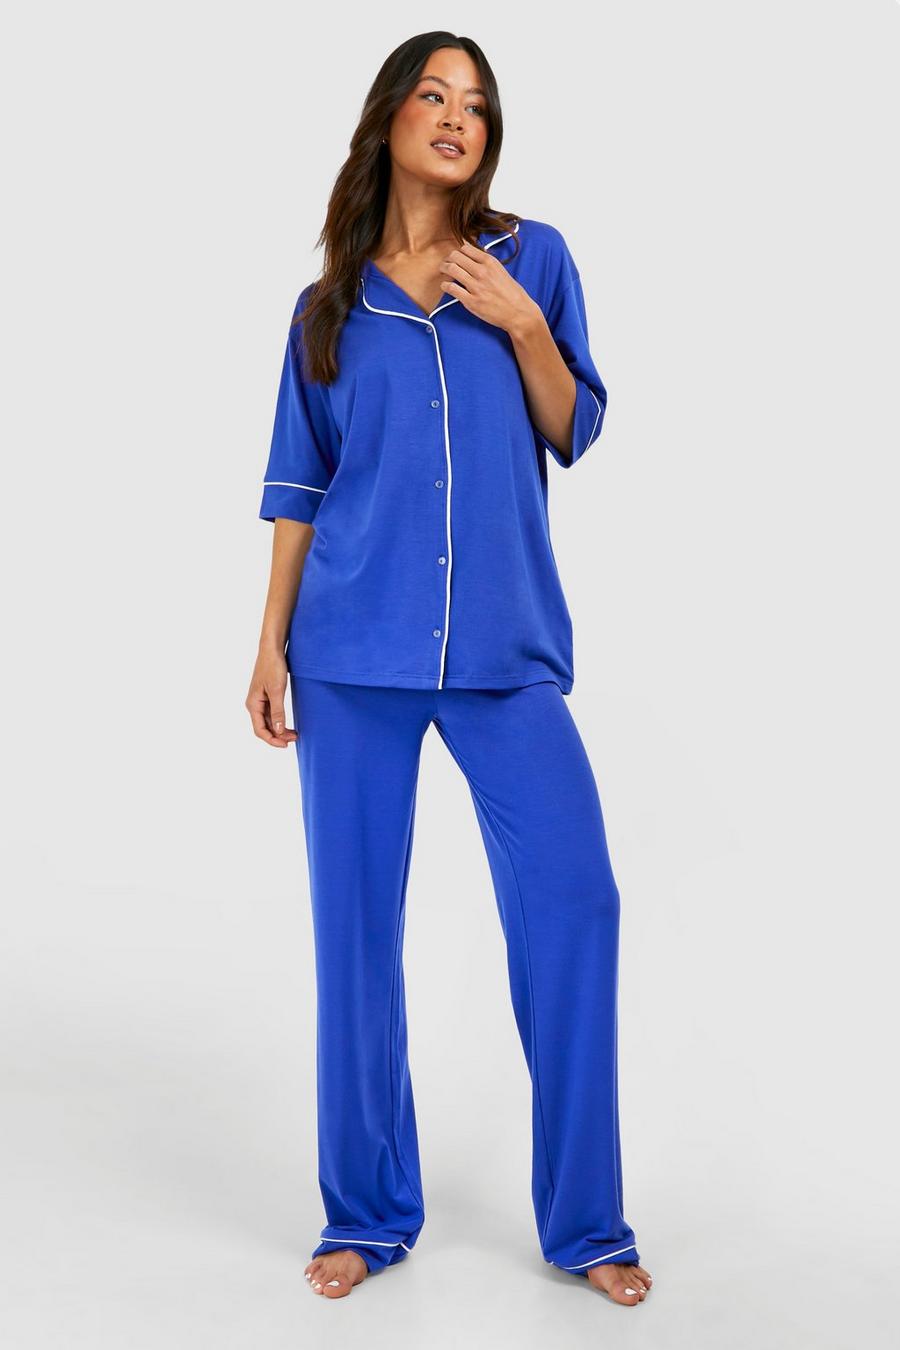 Moroccan blue Tall Jersey Knit Piping Pants Pj Set image number 1